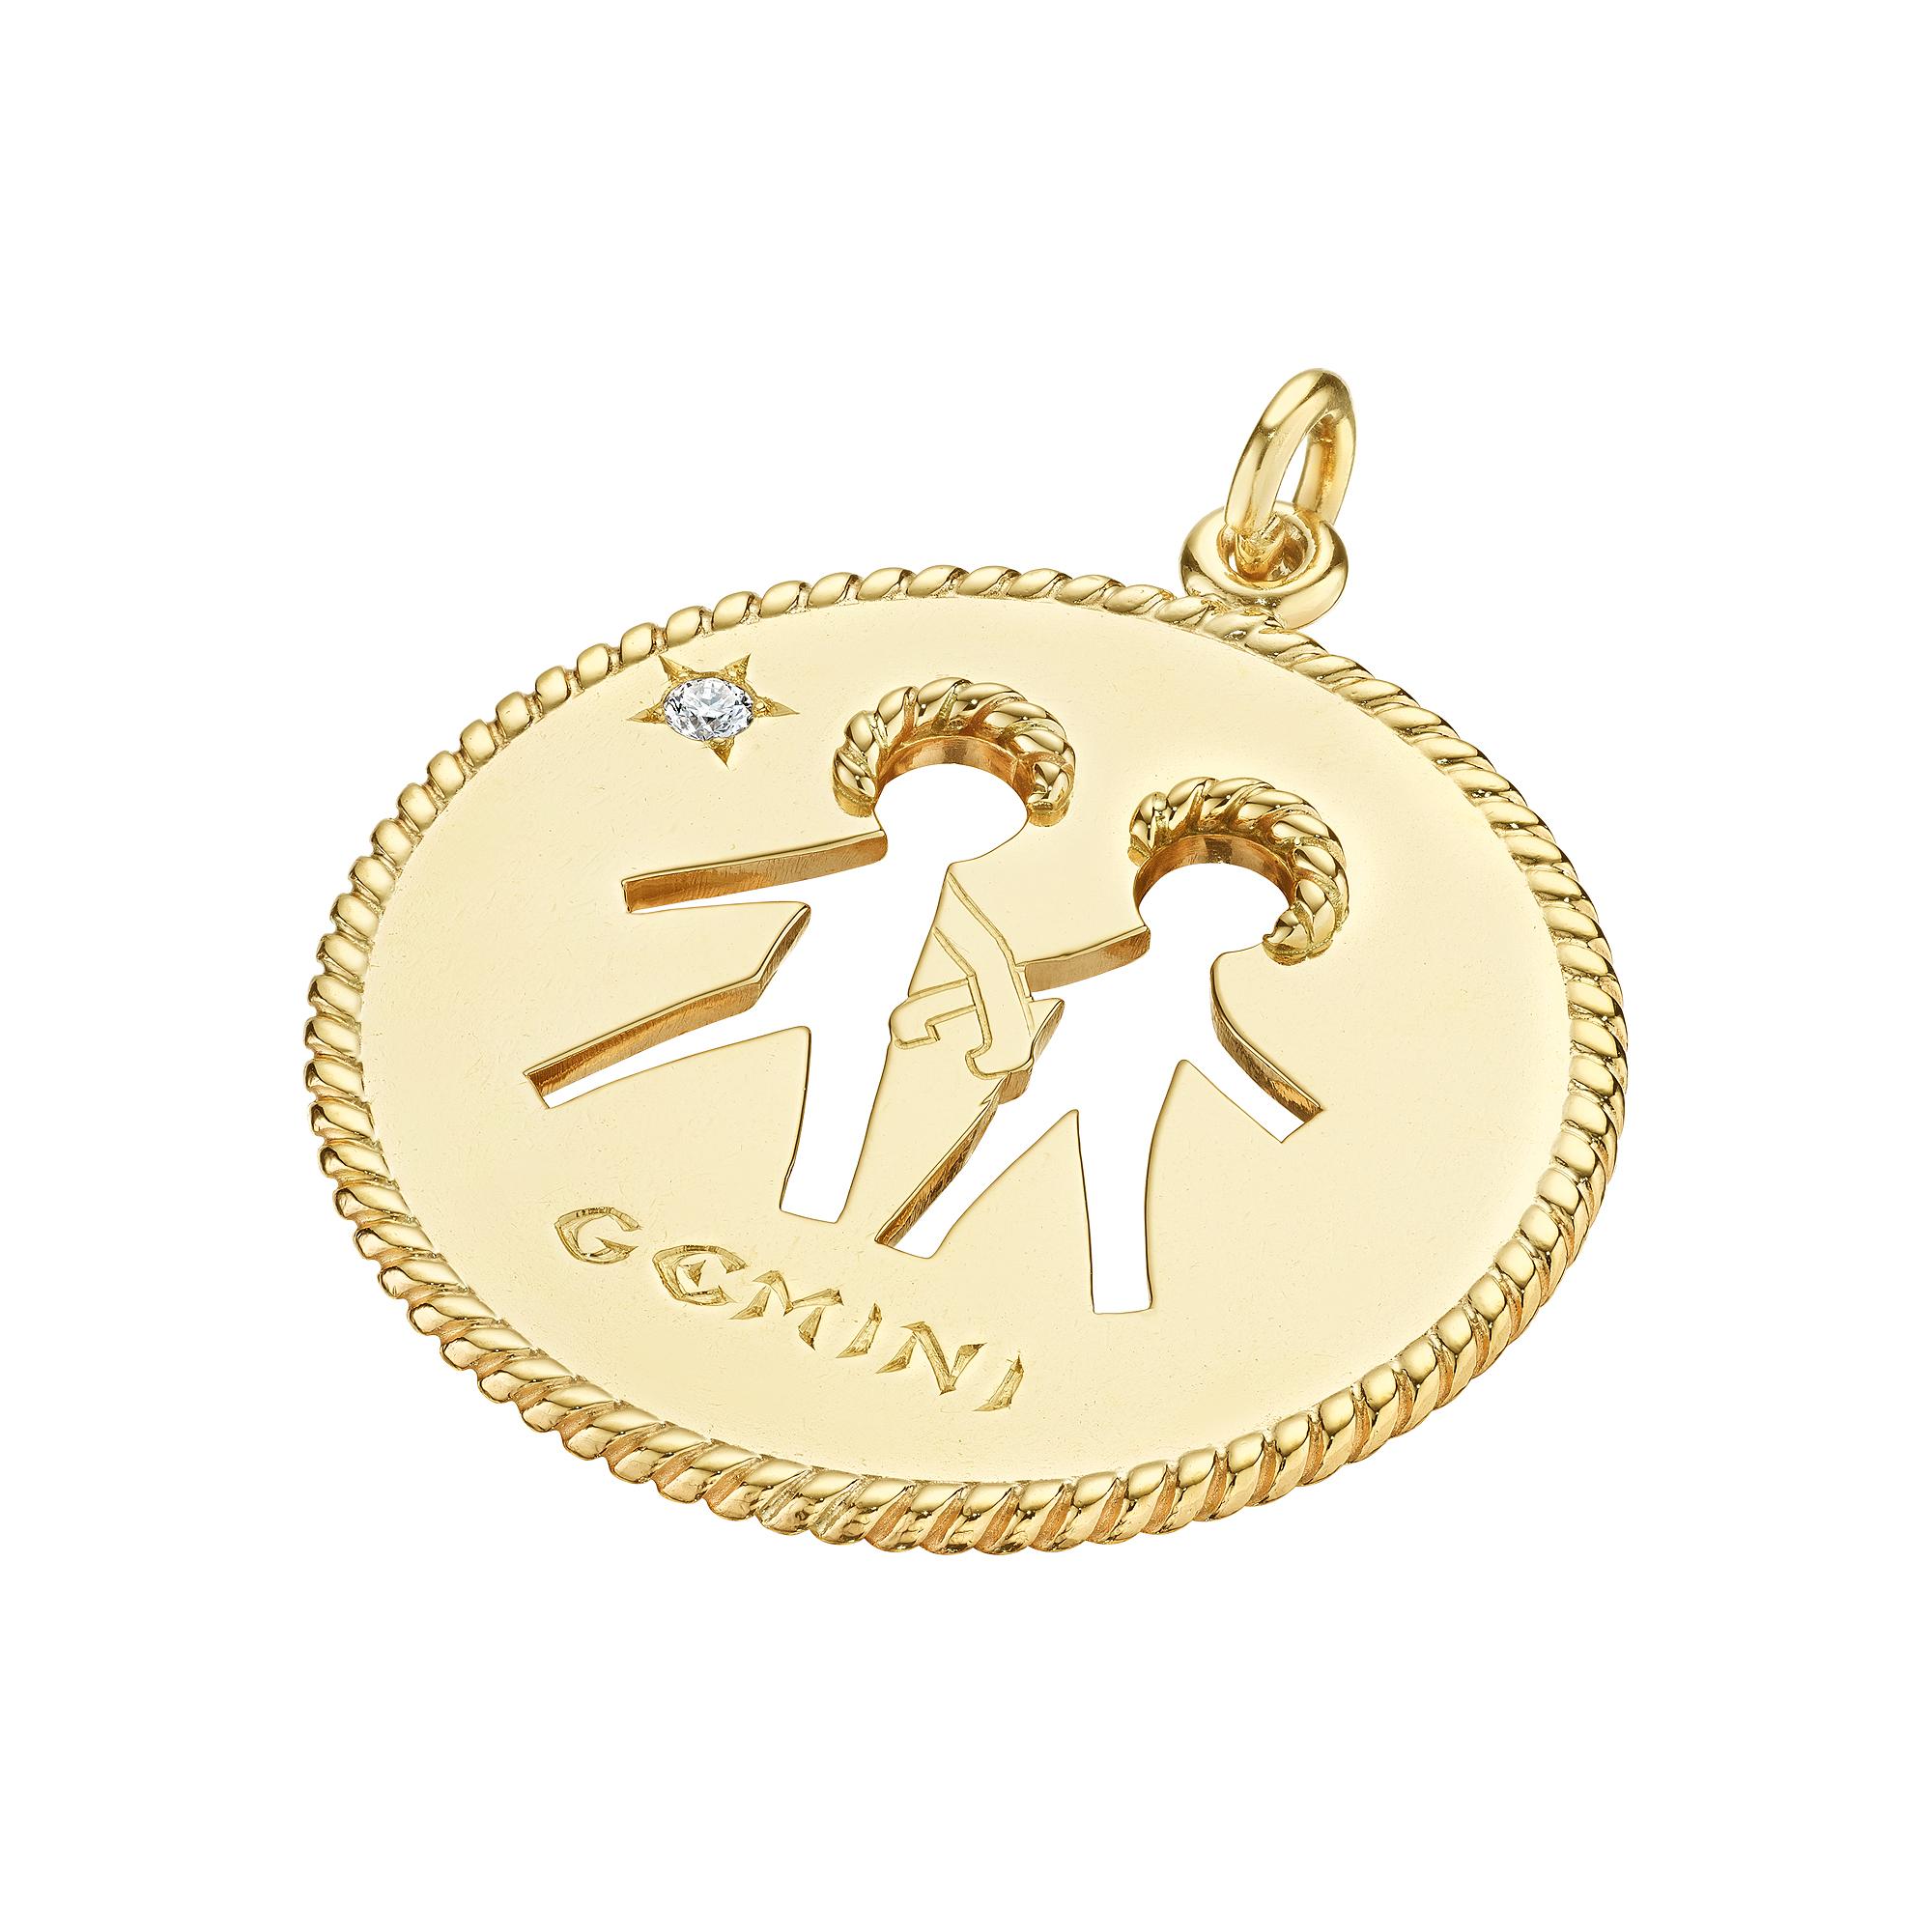 Two is better than one, and with this Cartier mid-century Gemini zodiac pendant charm, you will never walk alone.  Walking hand in hand on this collectible disc, the pierced Gemini twins are guided by a diamond star and are guaranteed to always make